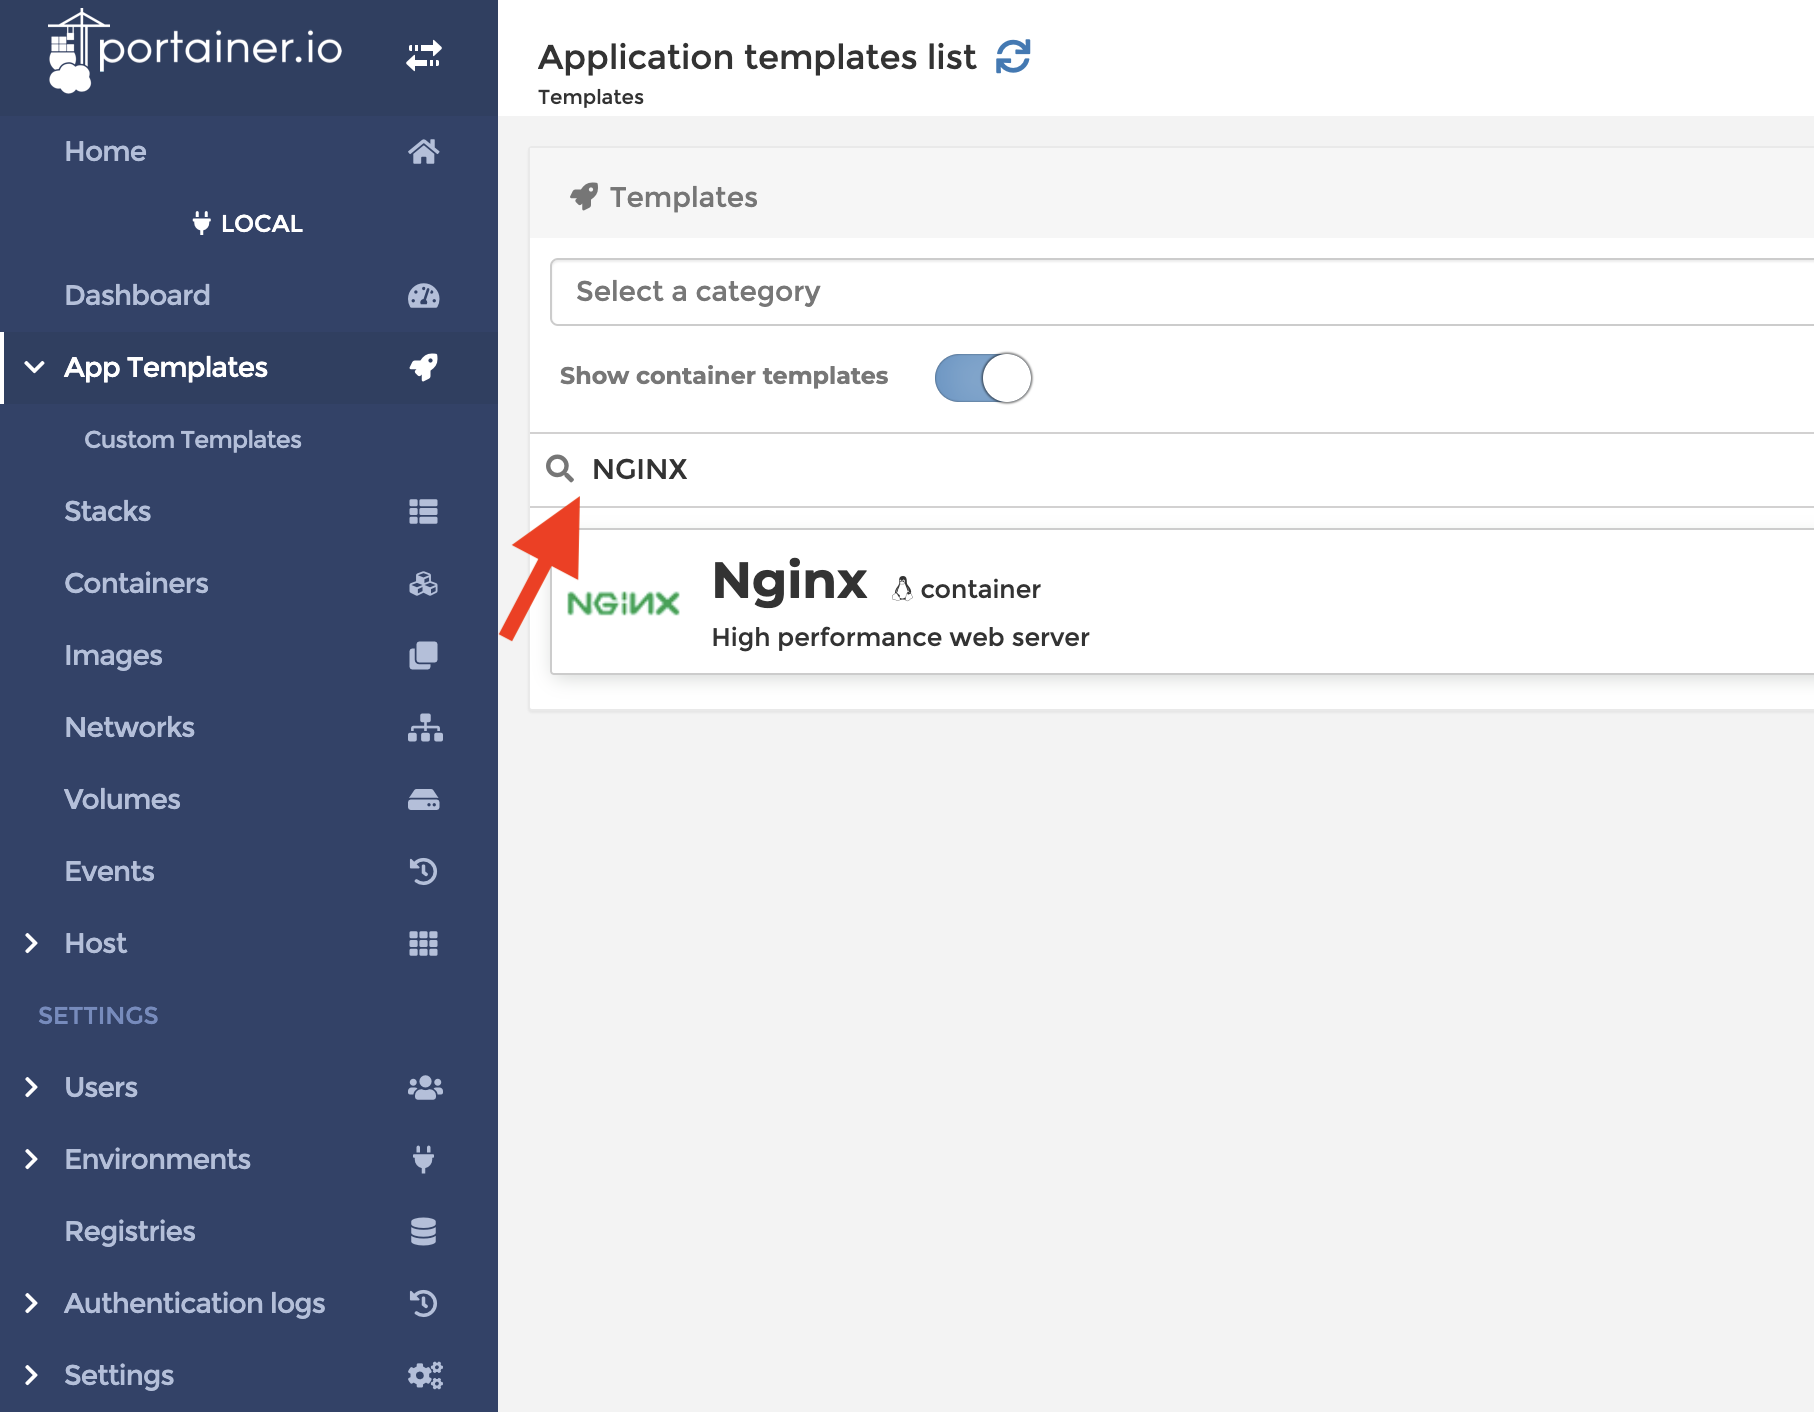 image: Search NGINX application template